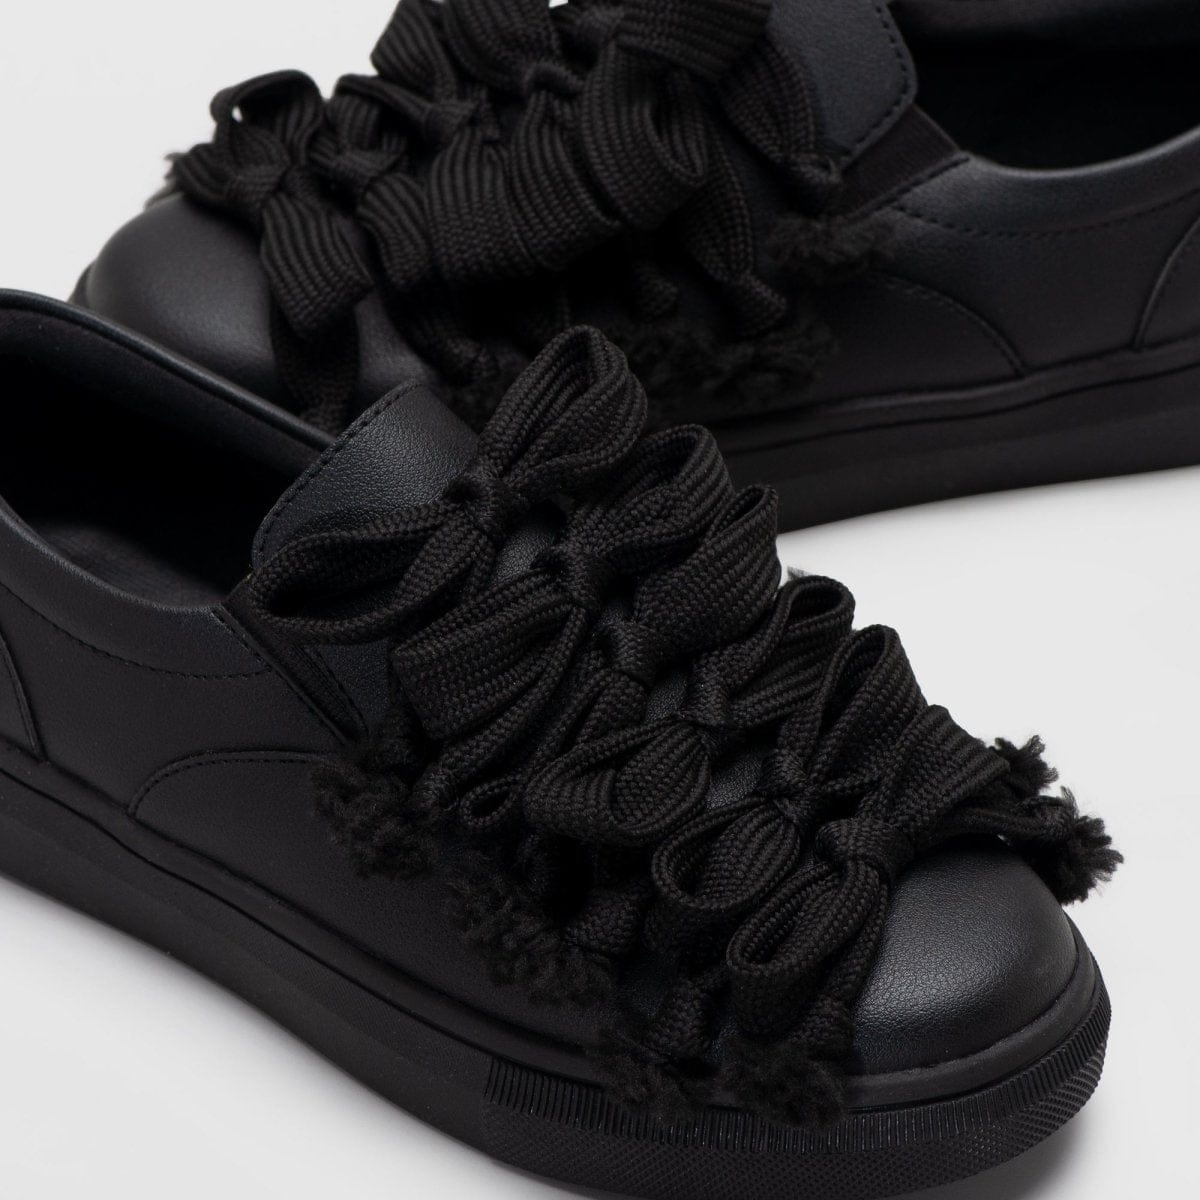 Adorable Projects Official Sneakers Elenra Sneakers Black